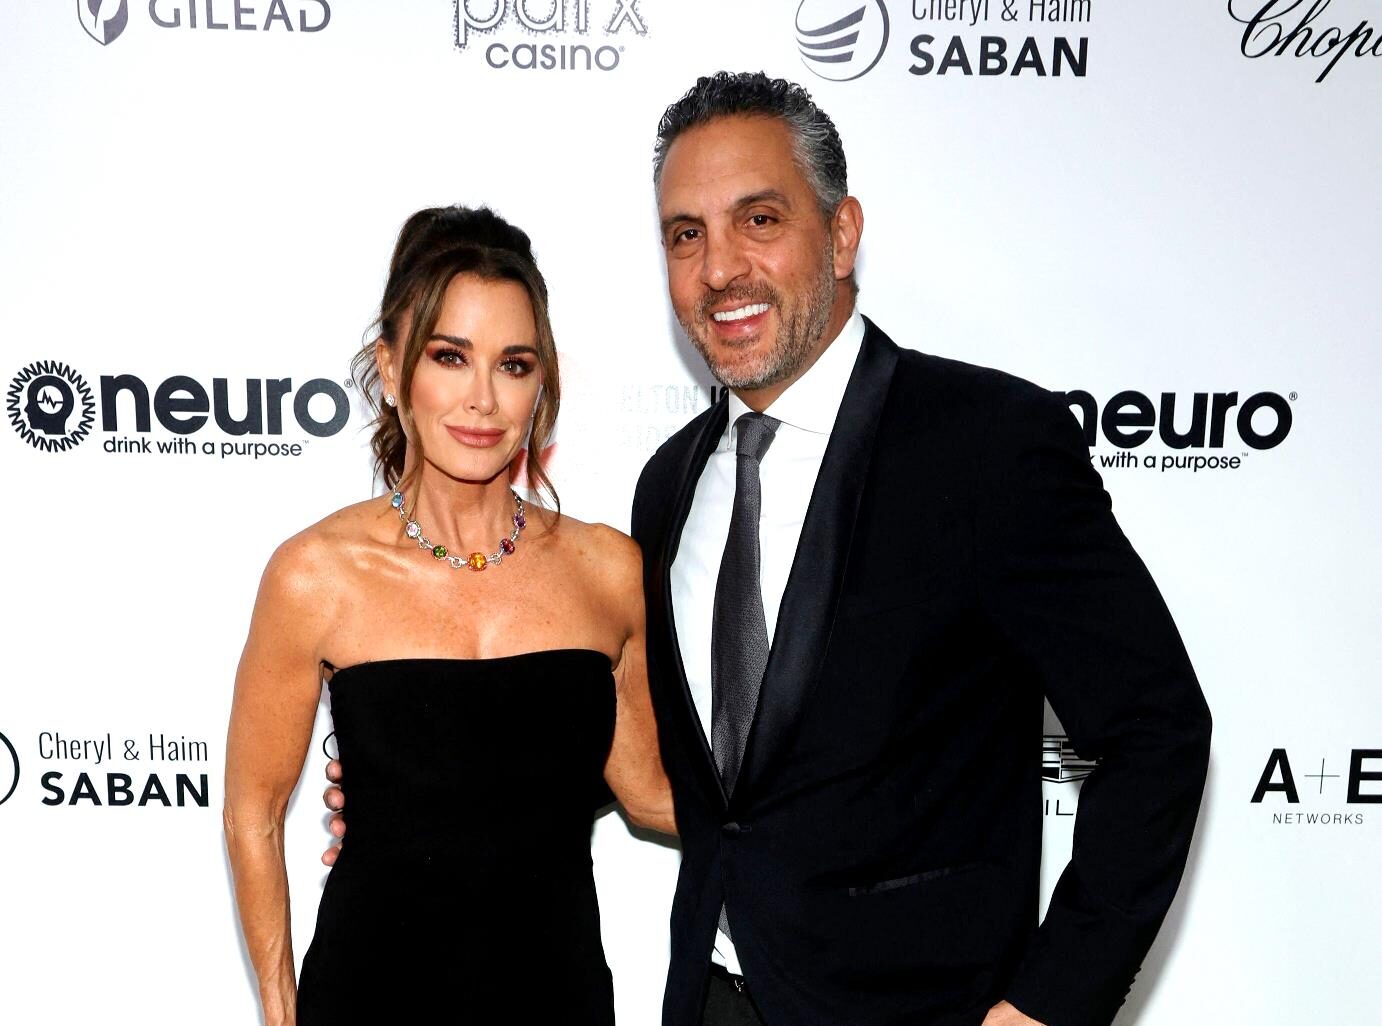 'RHOBH' star Kyle Richards' marriage to Mauricio Umansky is said to be a "work in progress" amid their reported separation.